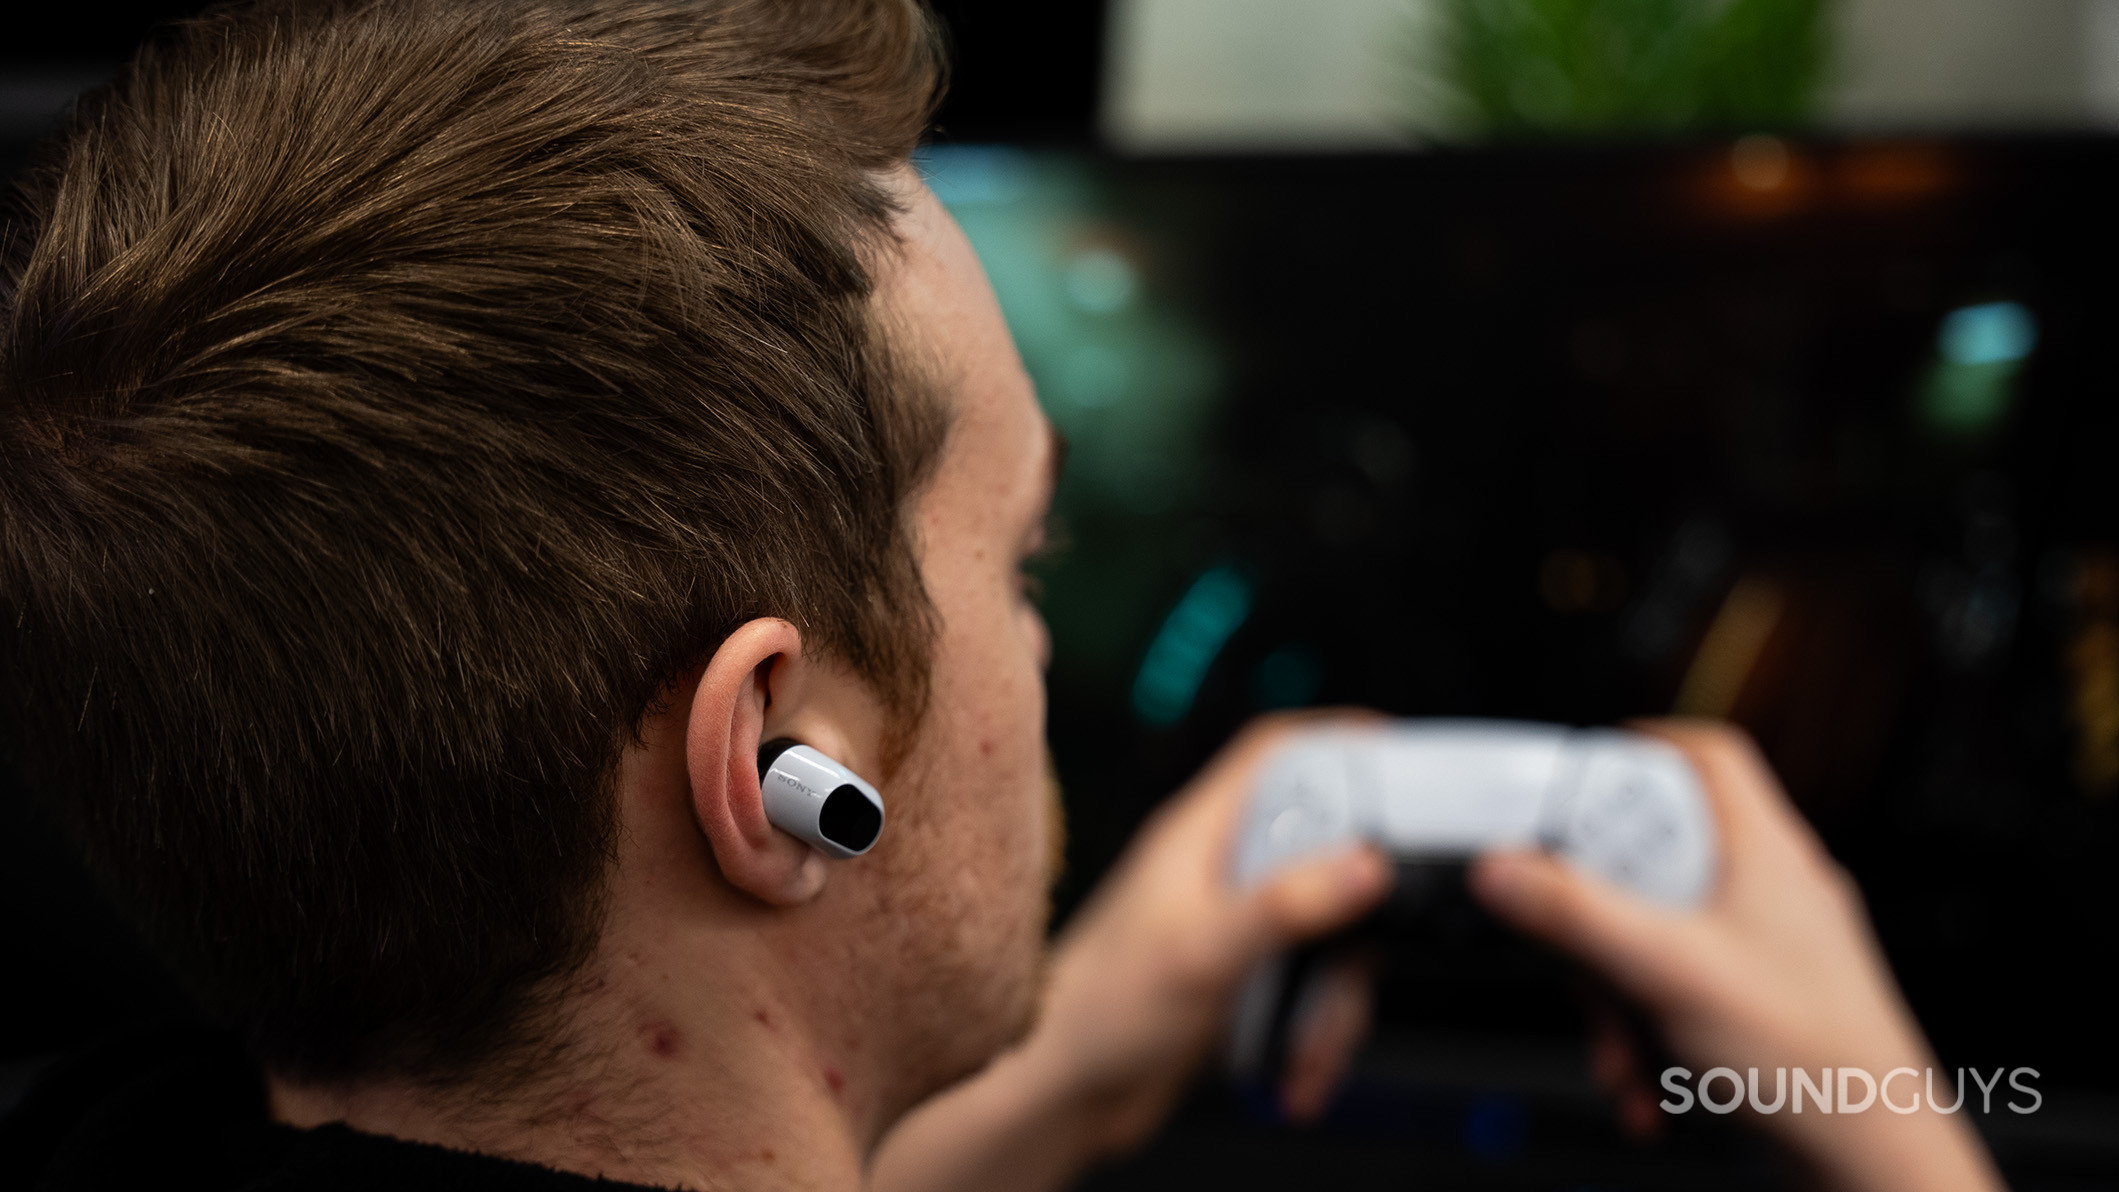 A man wearing the Sony INZONE Buds while gaming.